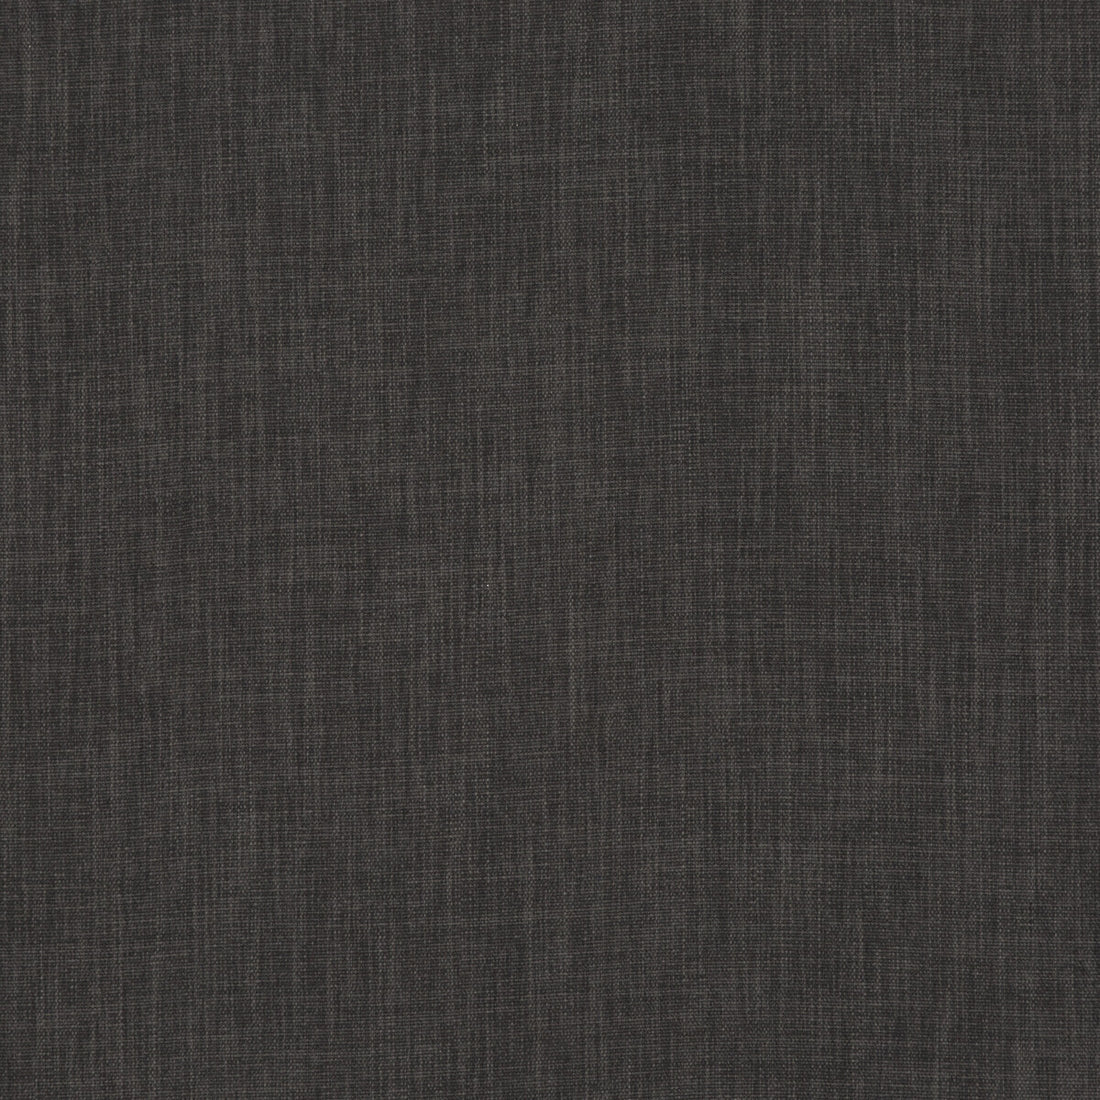 Fernshaw fabric in anthracite color - pattern PF50410.950.0 - by Baker Lifestyle in the Notebooks collection